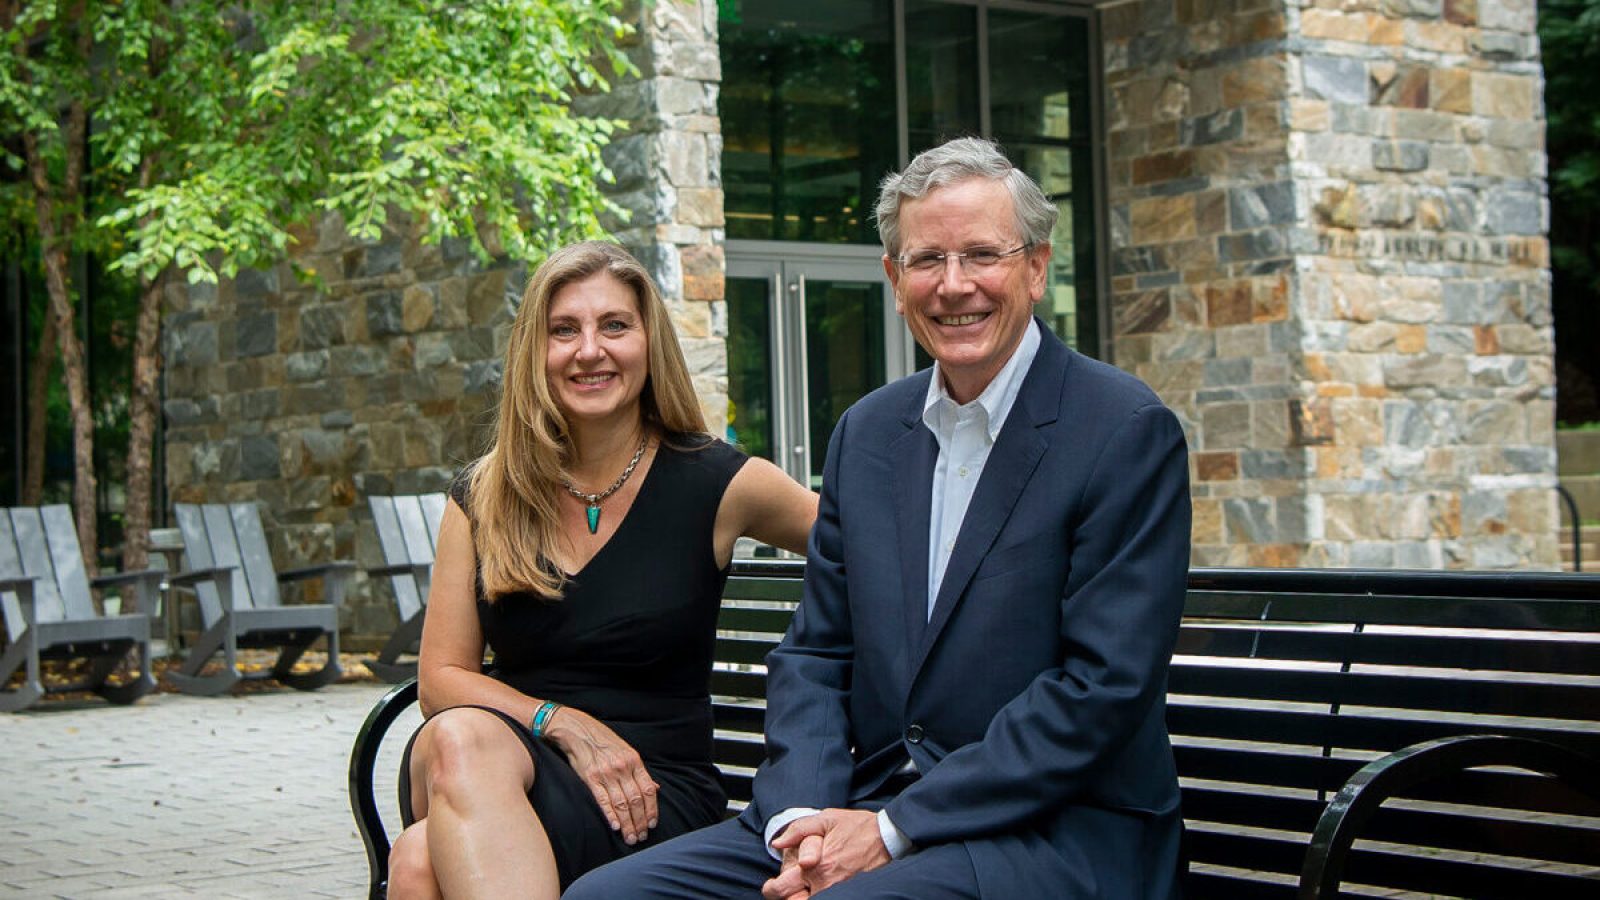 Sheila McMullan (left) wears a black dress and John Monahan (right) wears a suit as they sit on a bench in front of a stone building